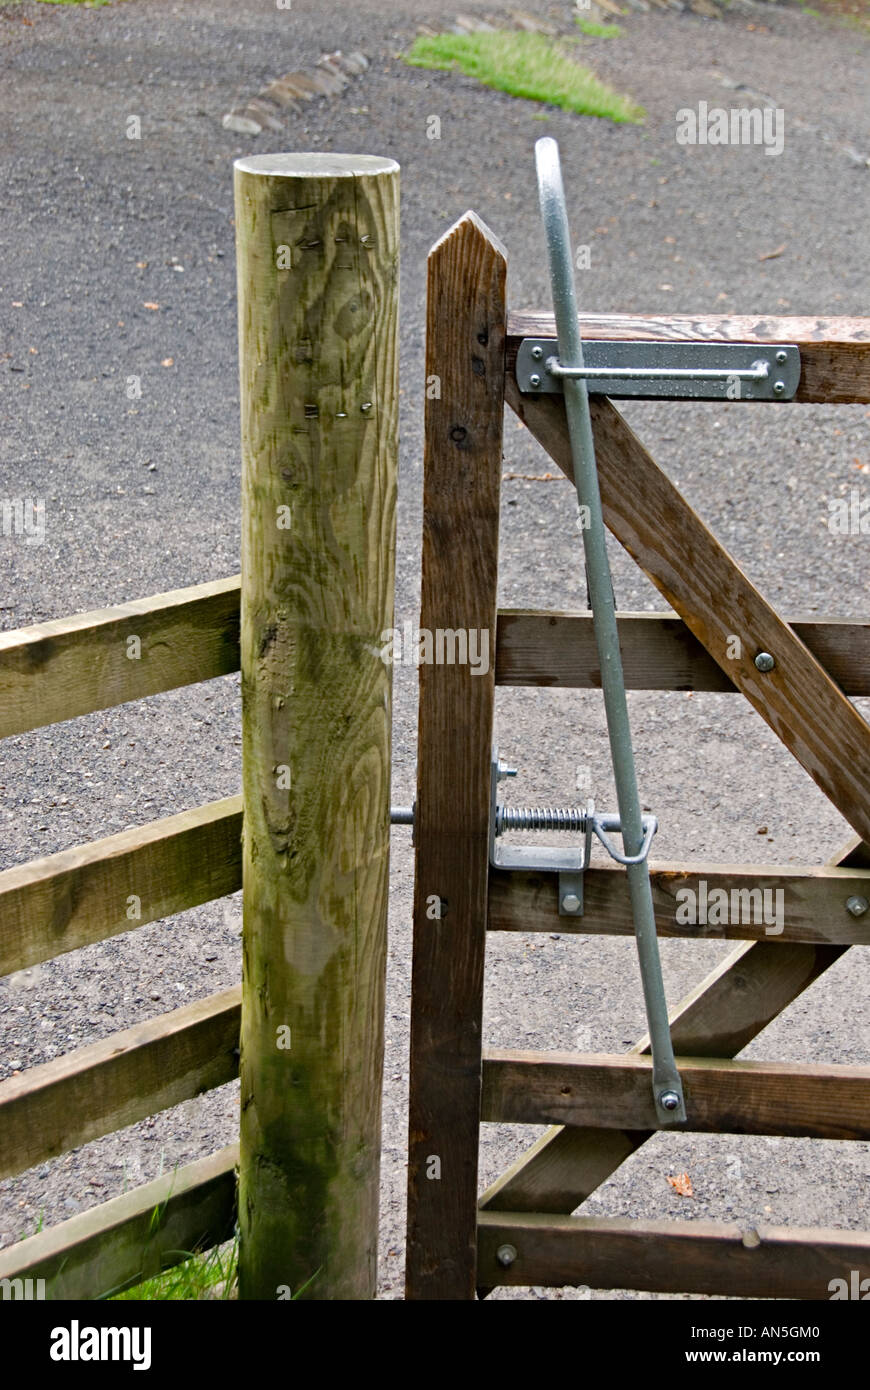 A wooden gate designed for easy access by wheelchair users Stock Photo